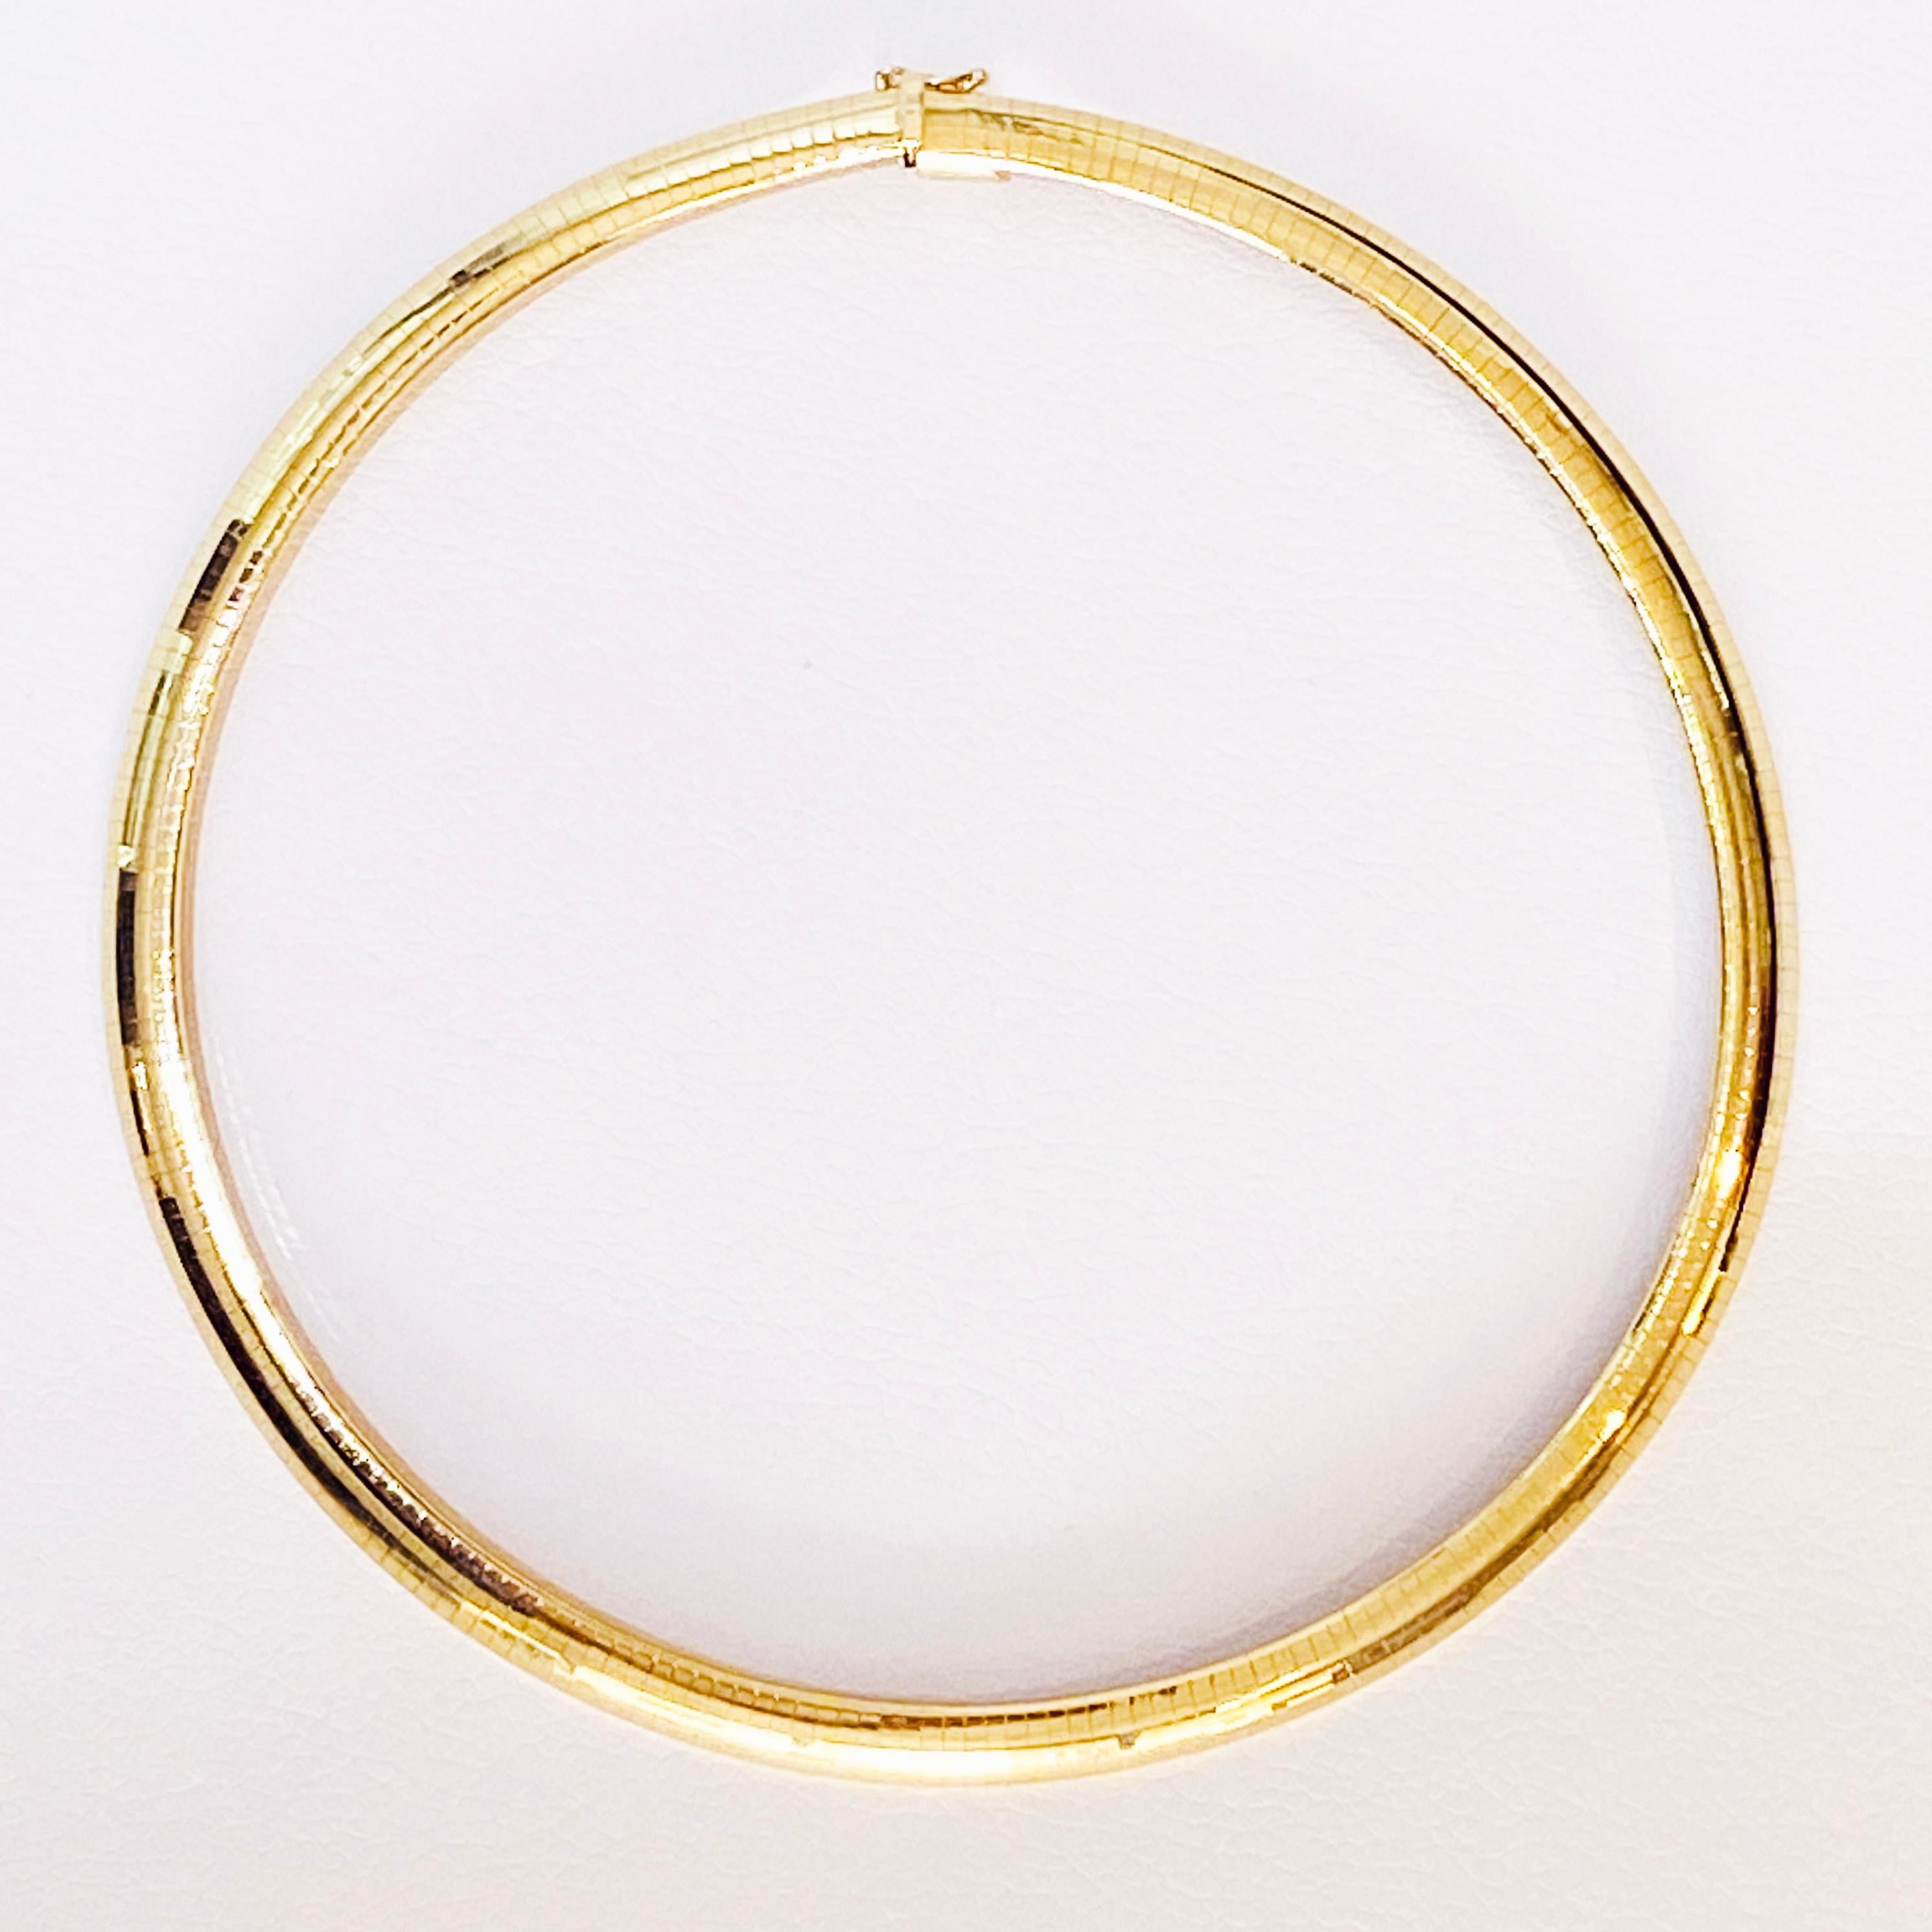 The 14k gold omega chain is stunning! Circa 1995, it is in perfect condition with a beautiful high polished finish!  The necklace feels like butter as it goes on the neck.  The length is perfect for almost any woman!

14K Yellow Gold 
52.4 Grams 
17